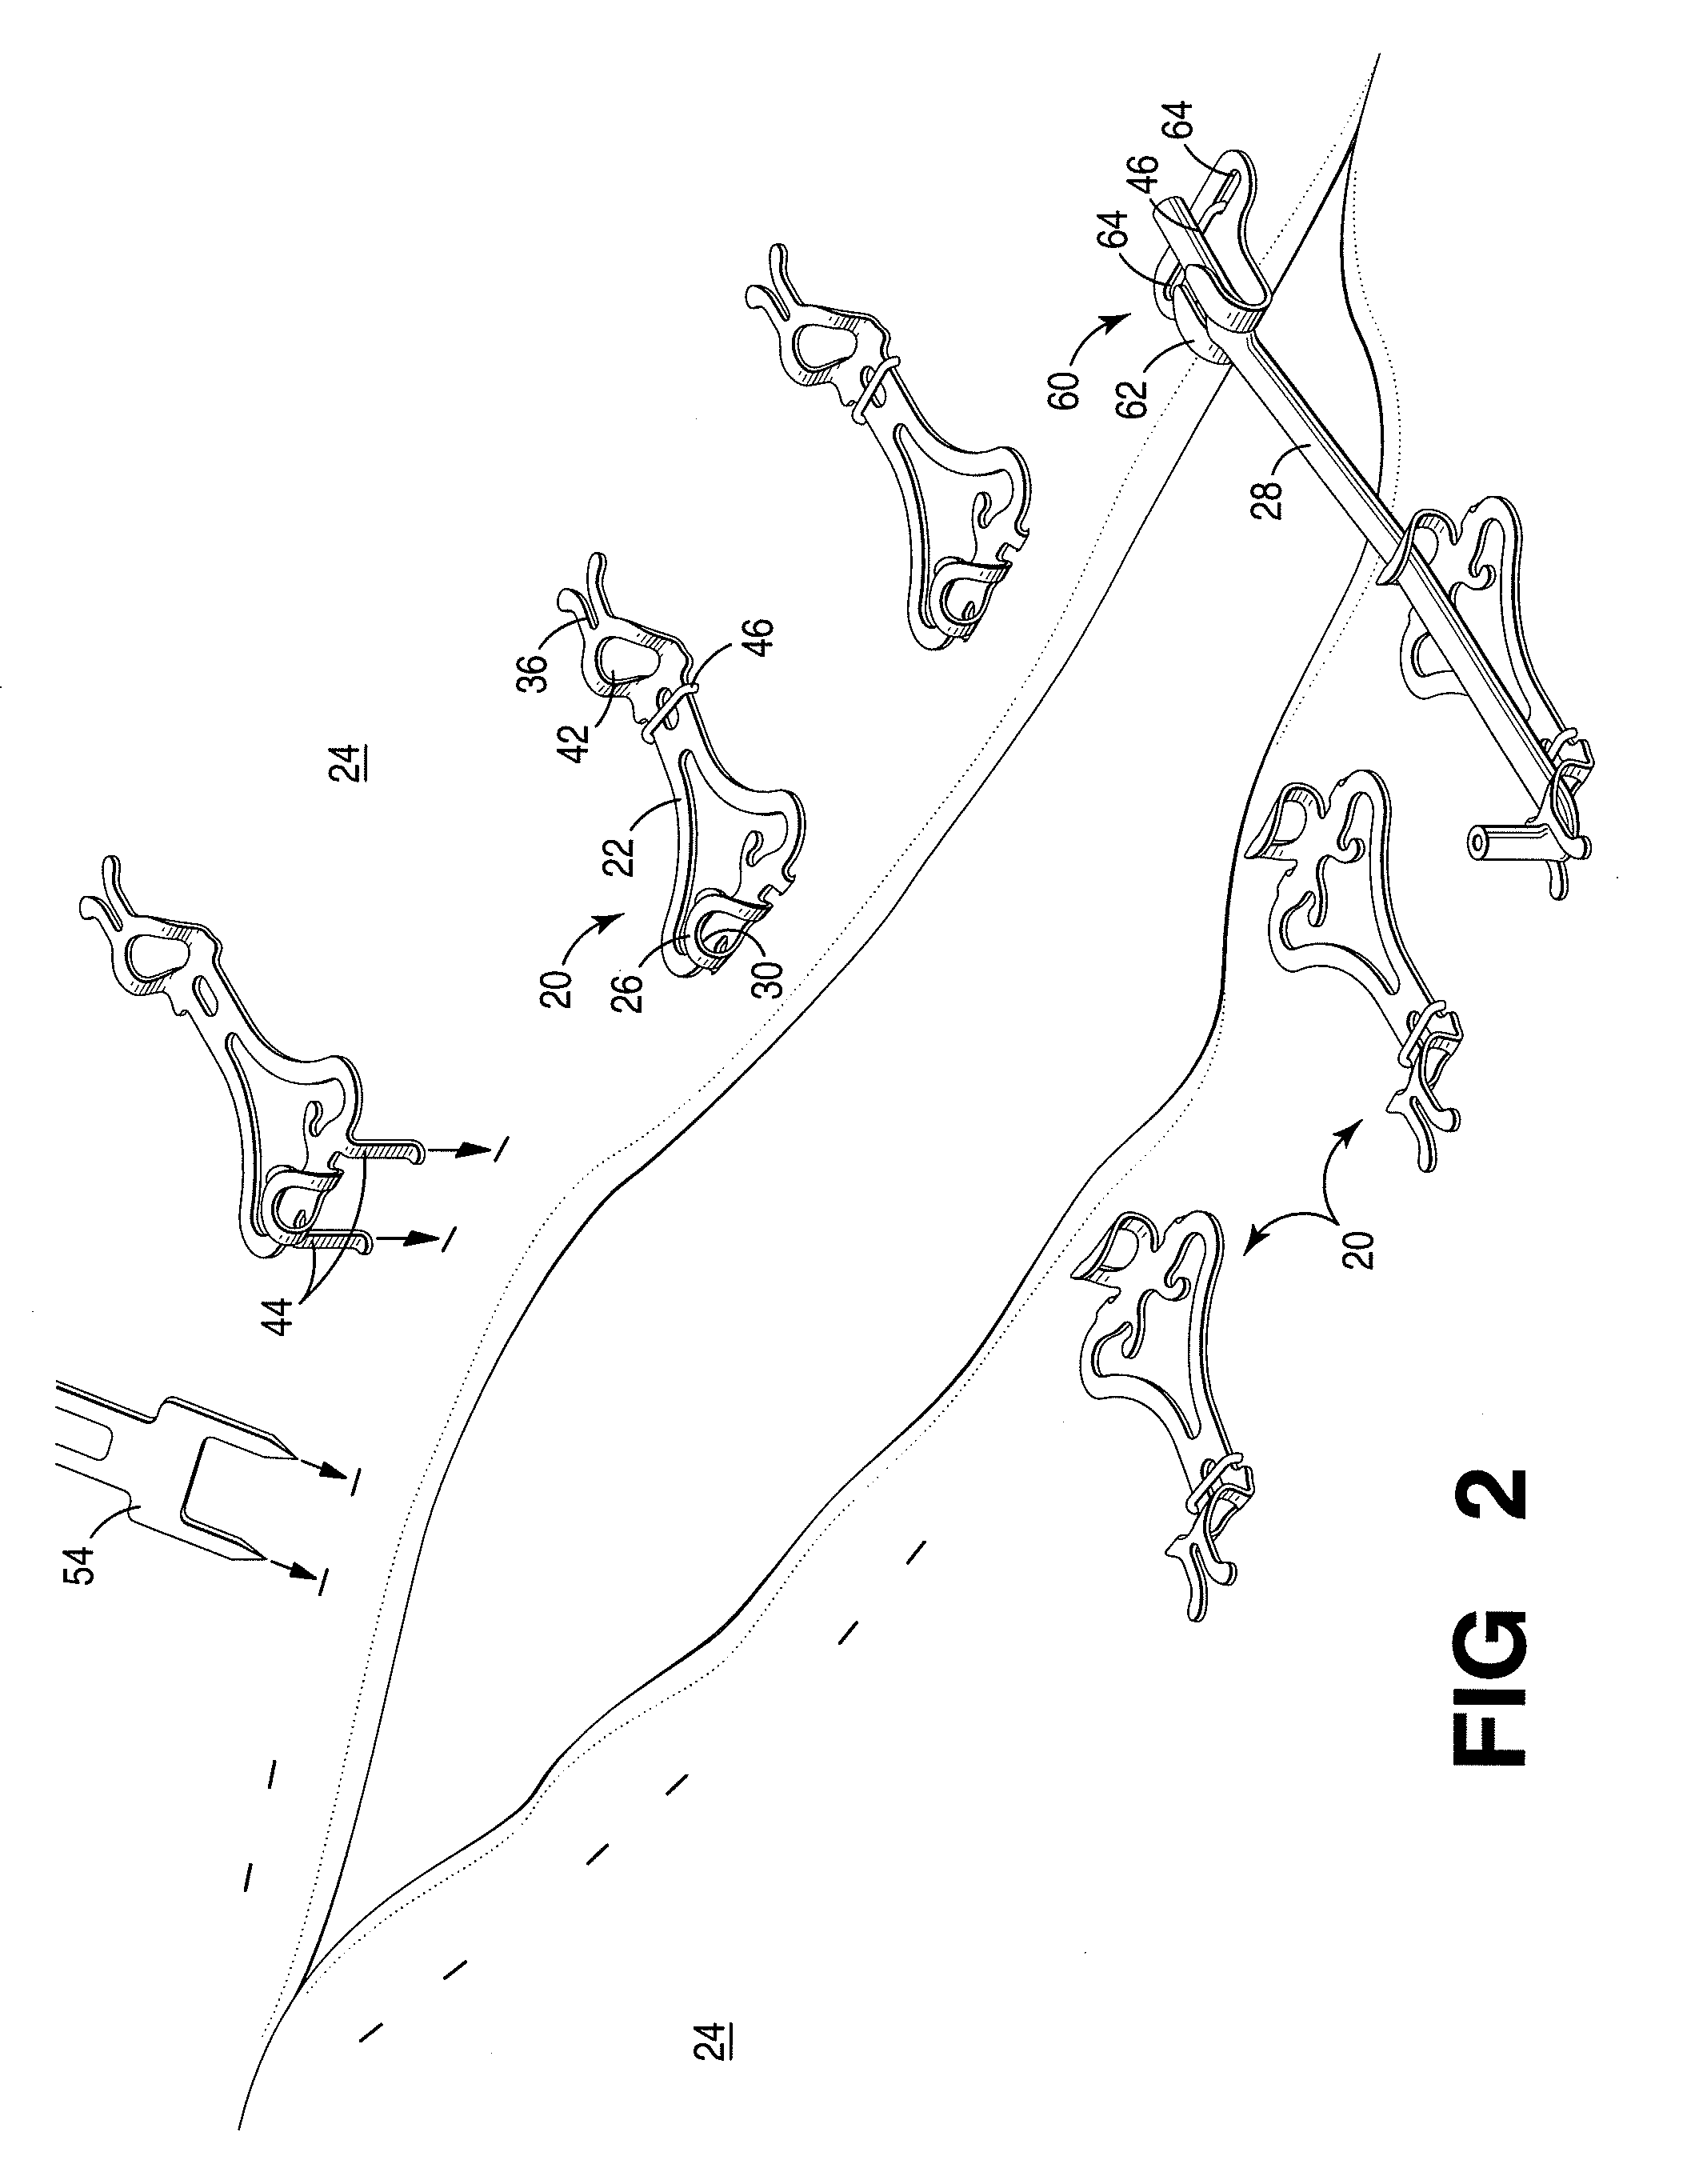 System and Method for Moving and Stretching Plastic Tissue